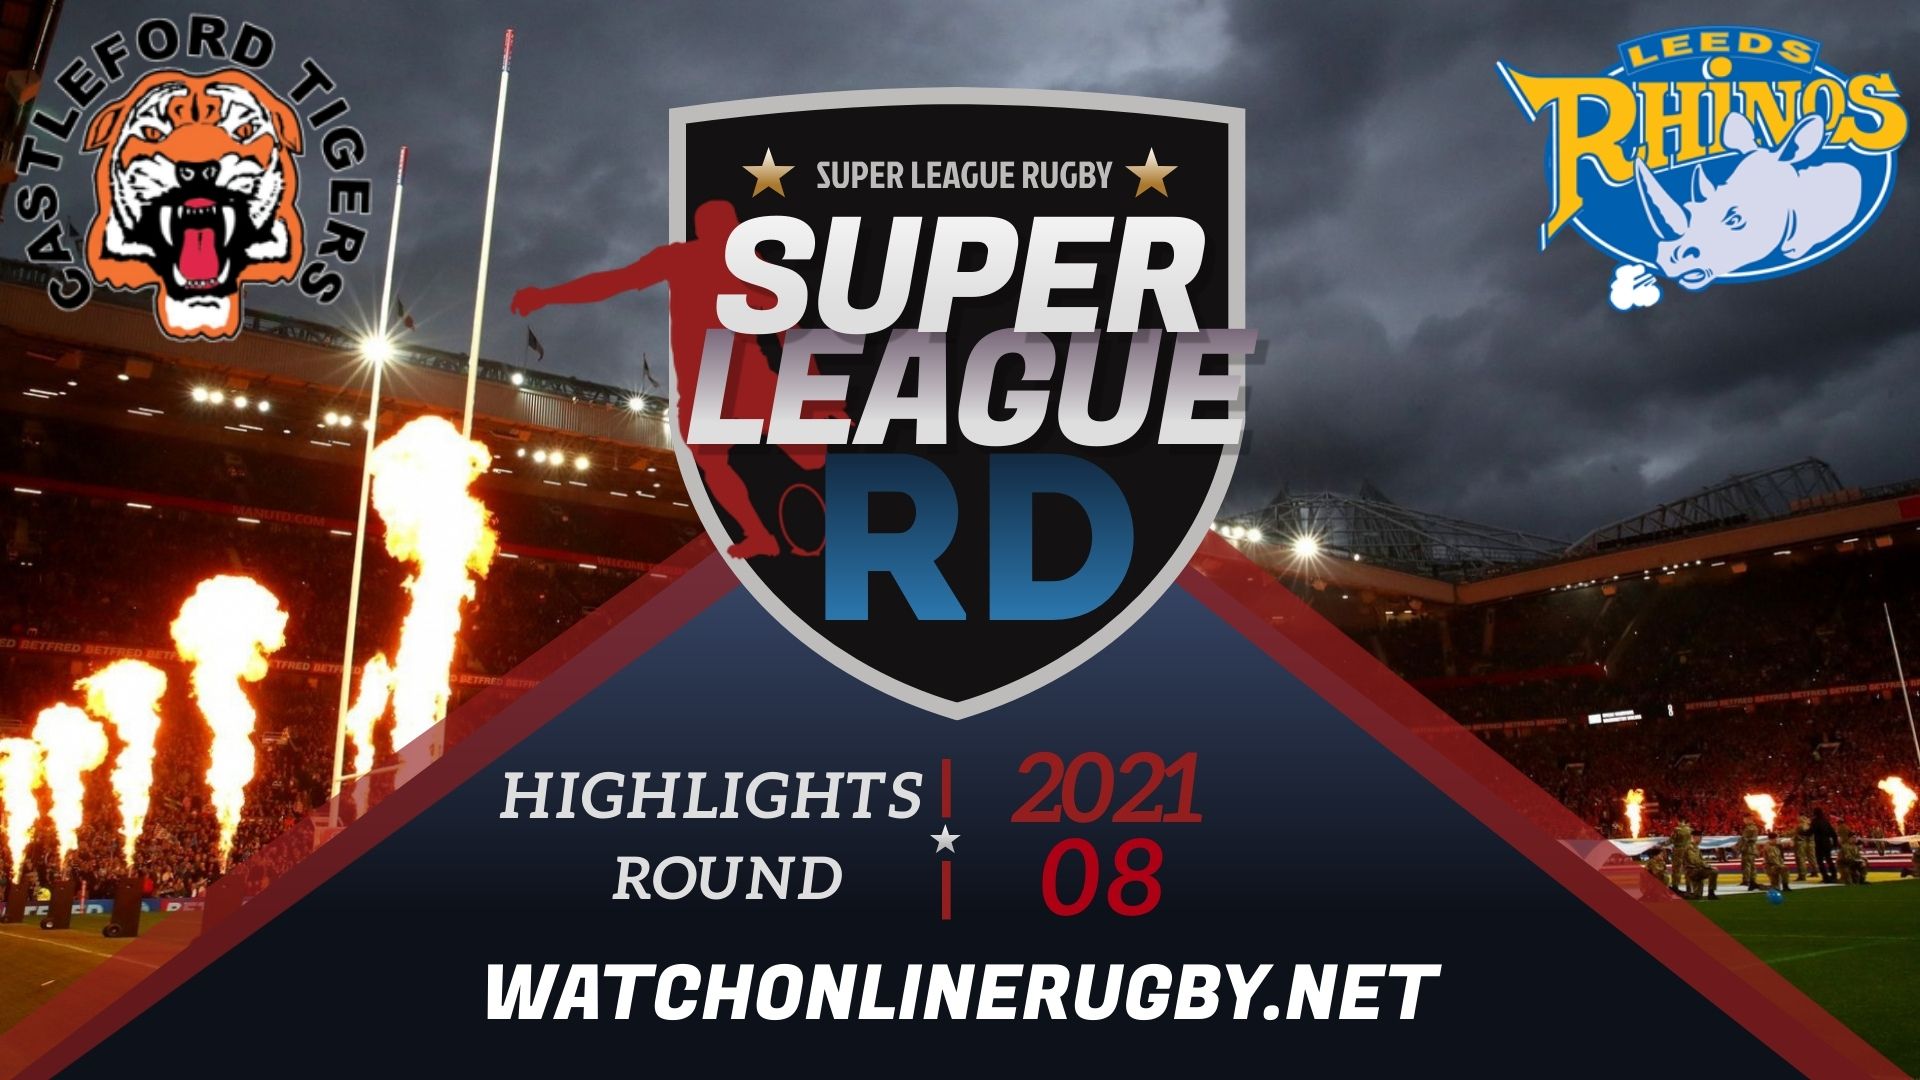 Castleford Tigers Vs Leeds Rhinos Super League Rugby 2021 RD 8